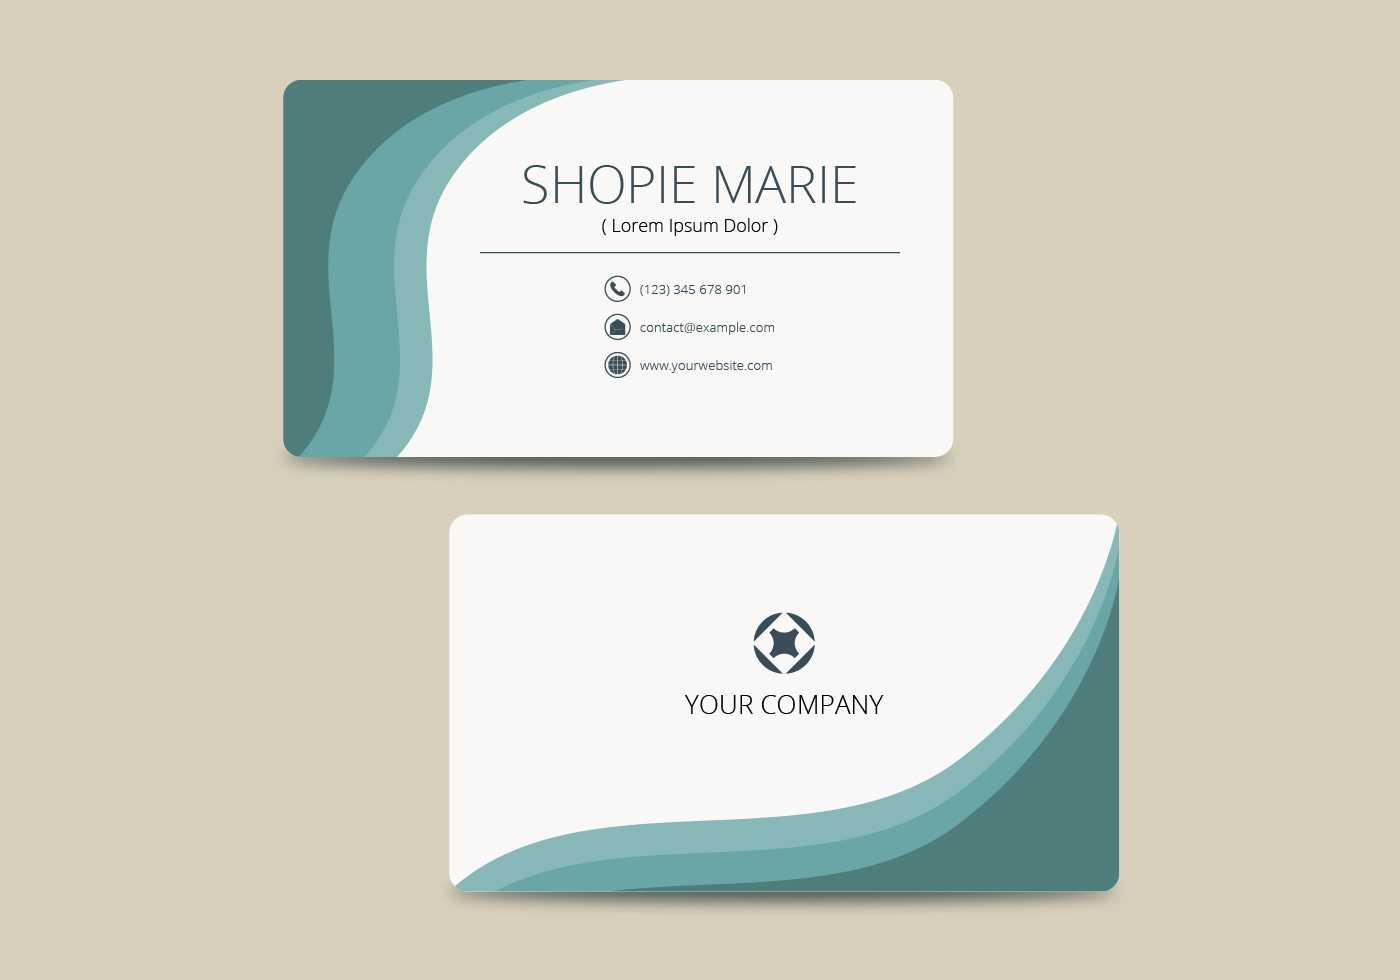 Teal Business Card Template Vector - Download Free Vectors Intended For Call Card Templates